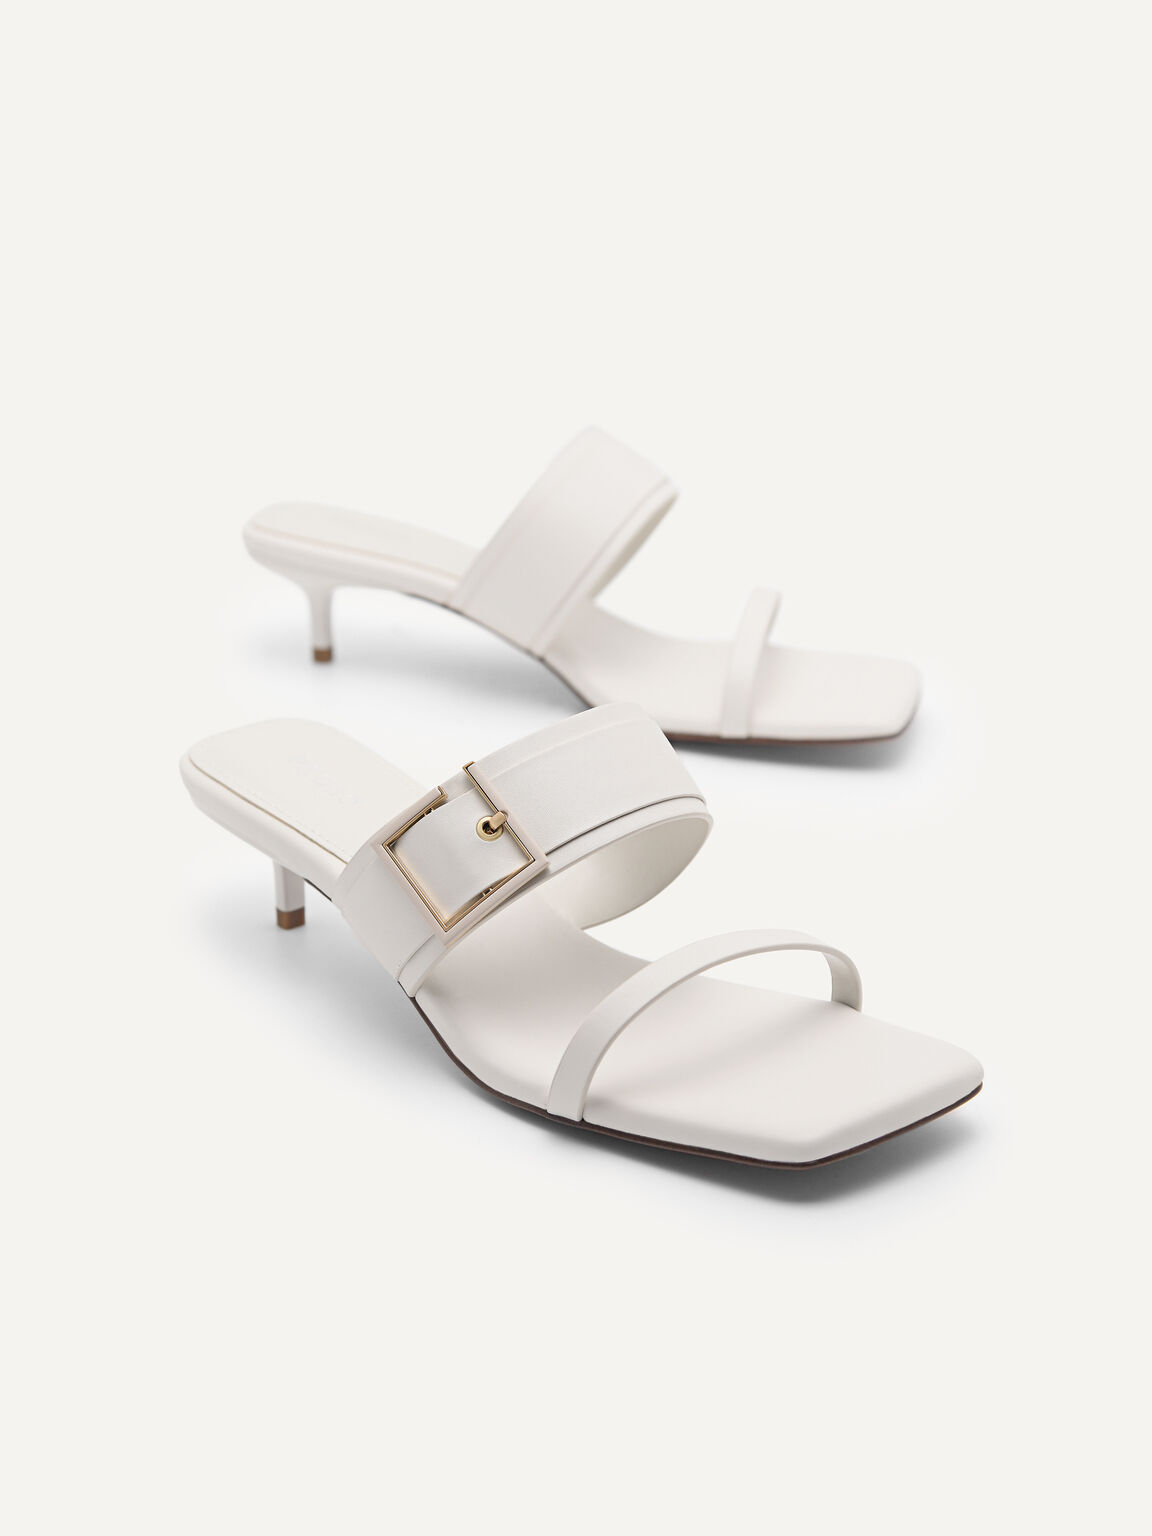 Double Strap Heeled Sandals, Chalk